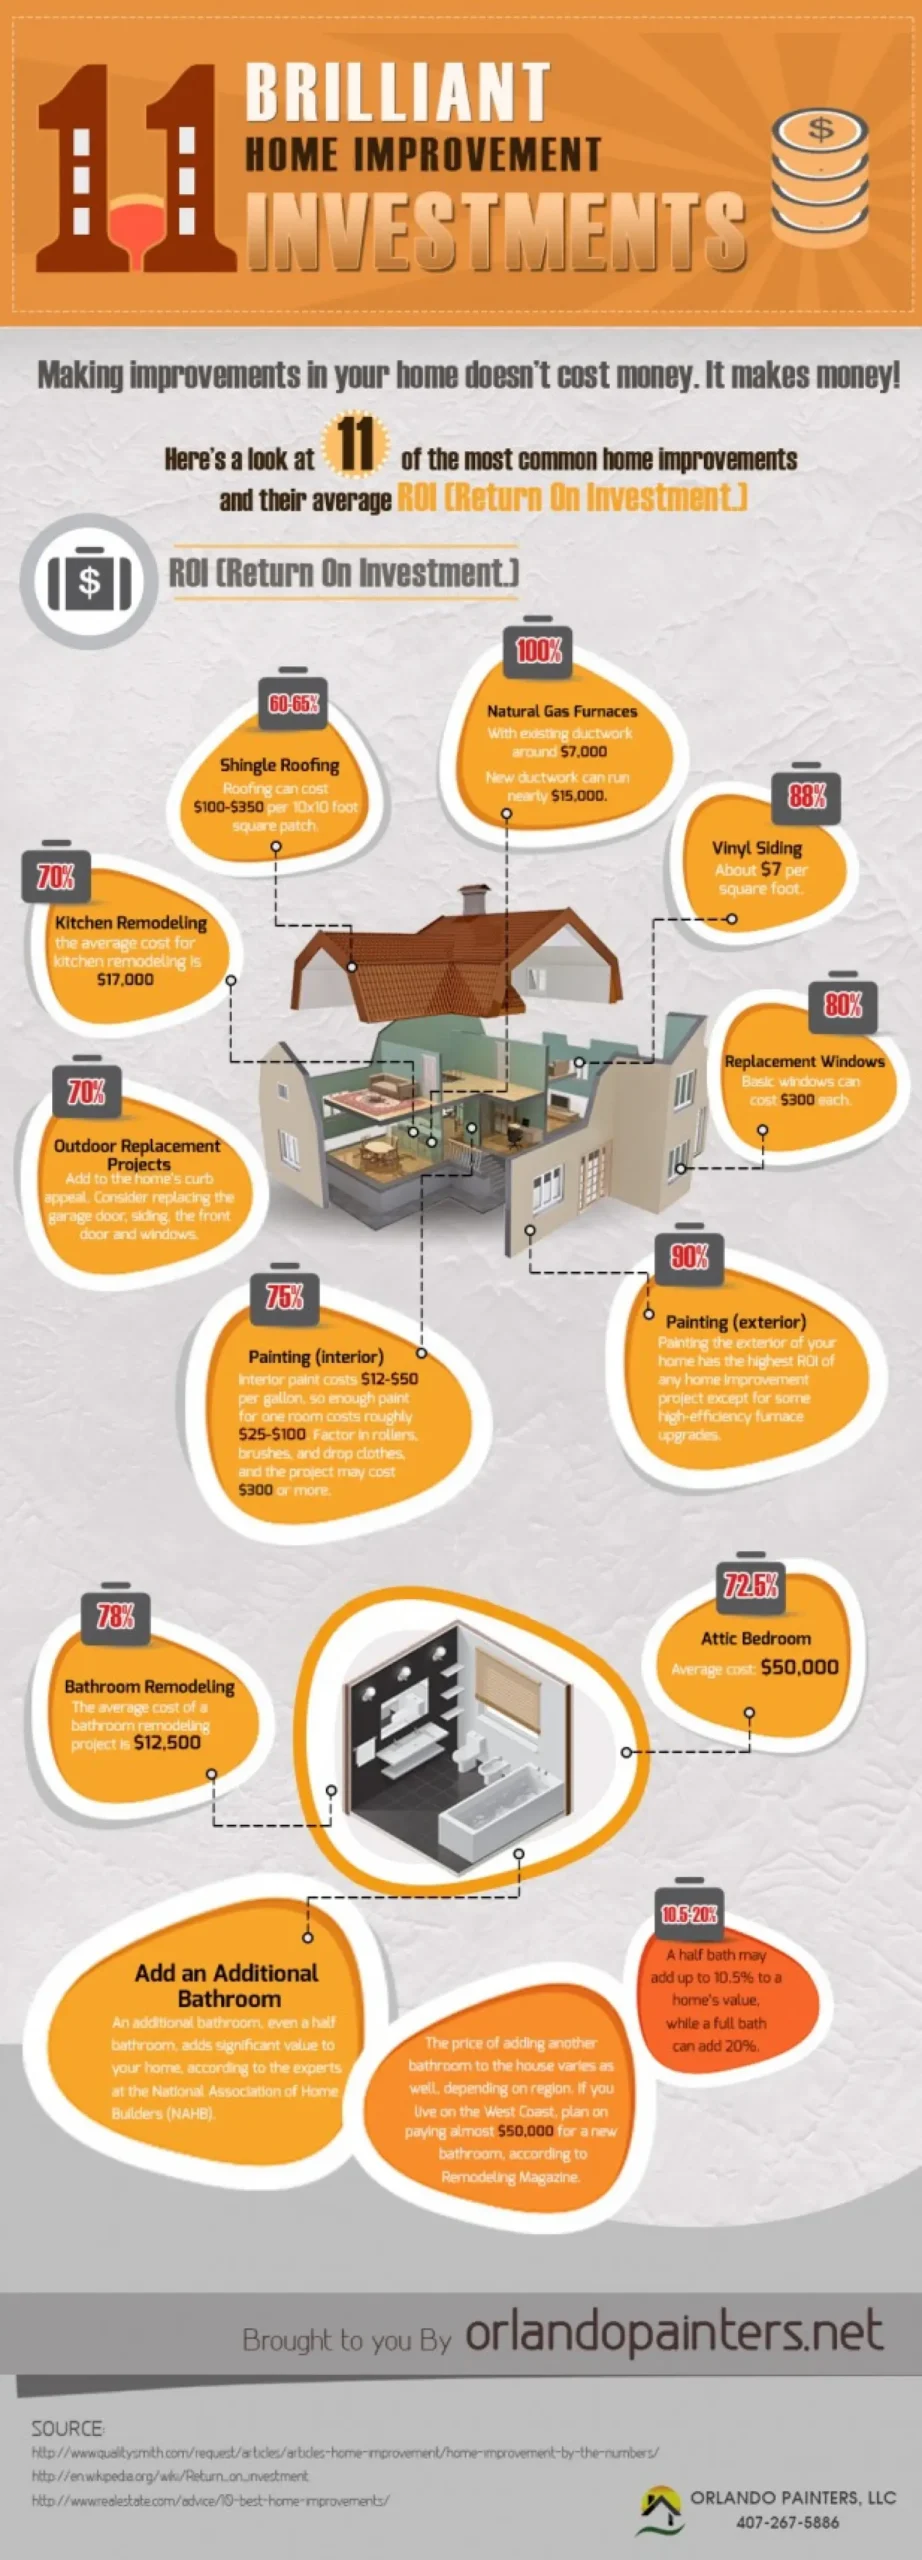 Best Home Improvement Investments [InfoGraphic]
